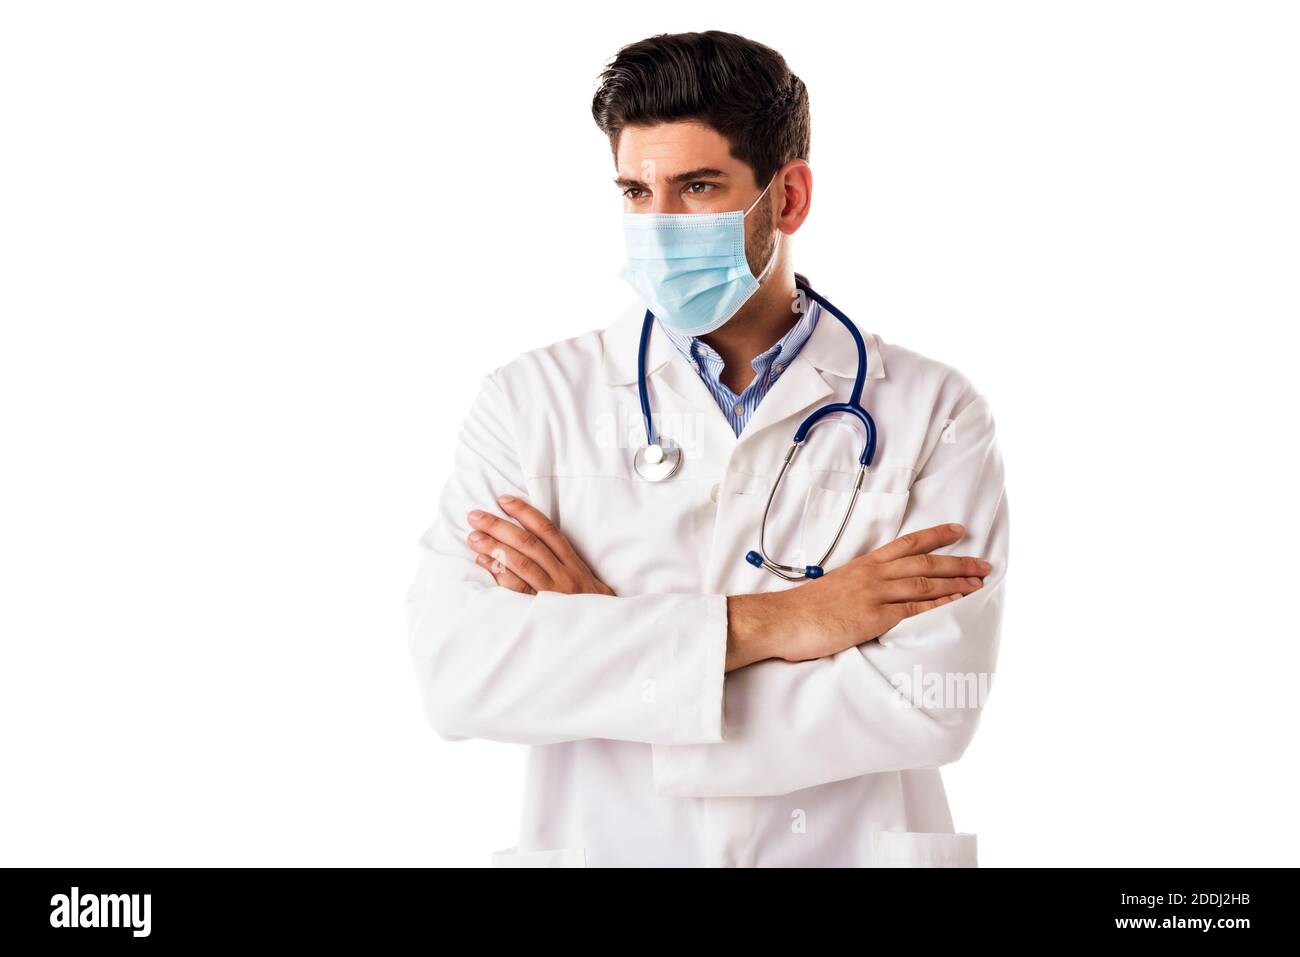 Portrait shot of male doctor wearing face mask while standing with arms crossed at isolated white background. Copy space. Stock Photo